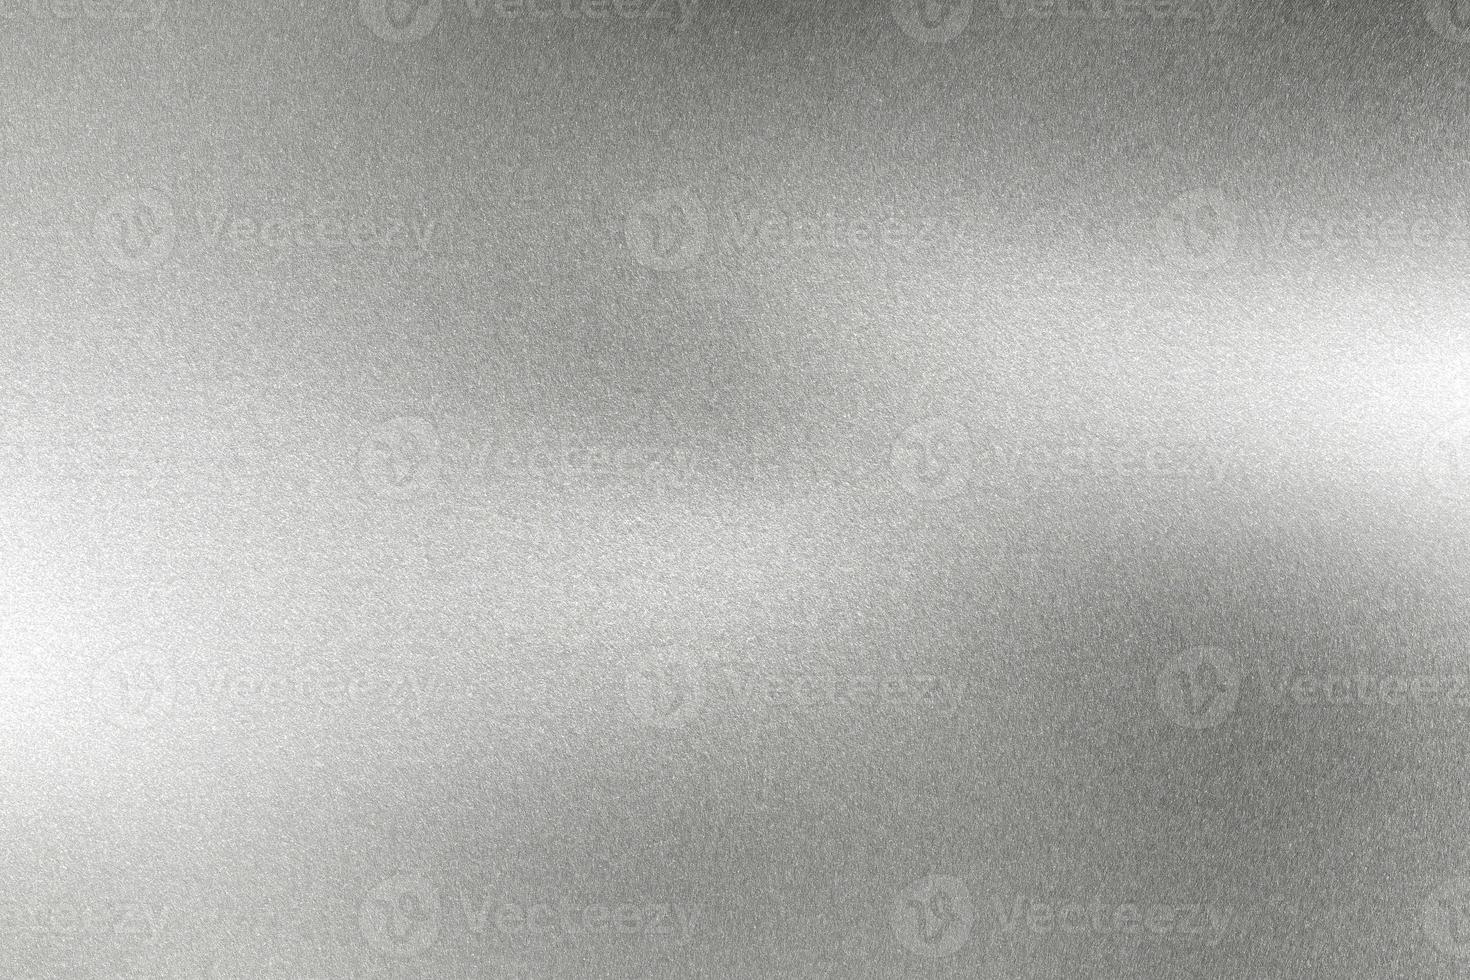 Light shining on wave silver metal wall, abstract texture background photo